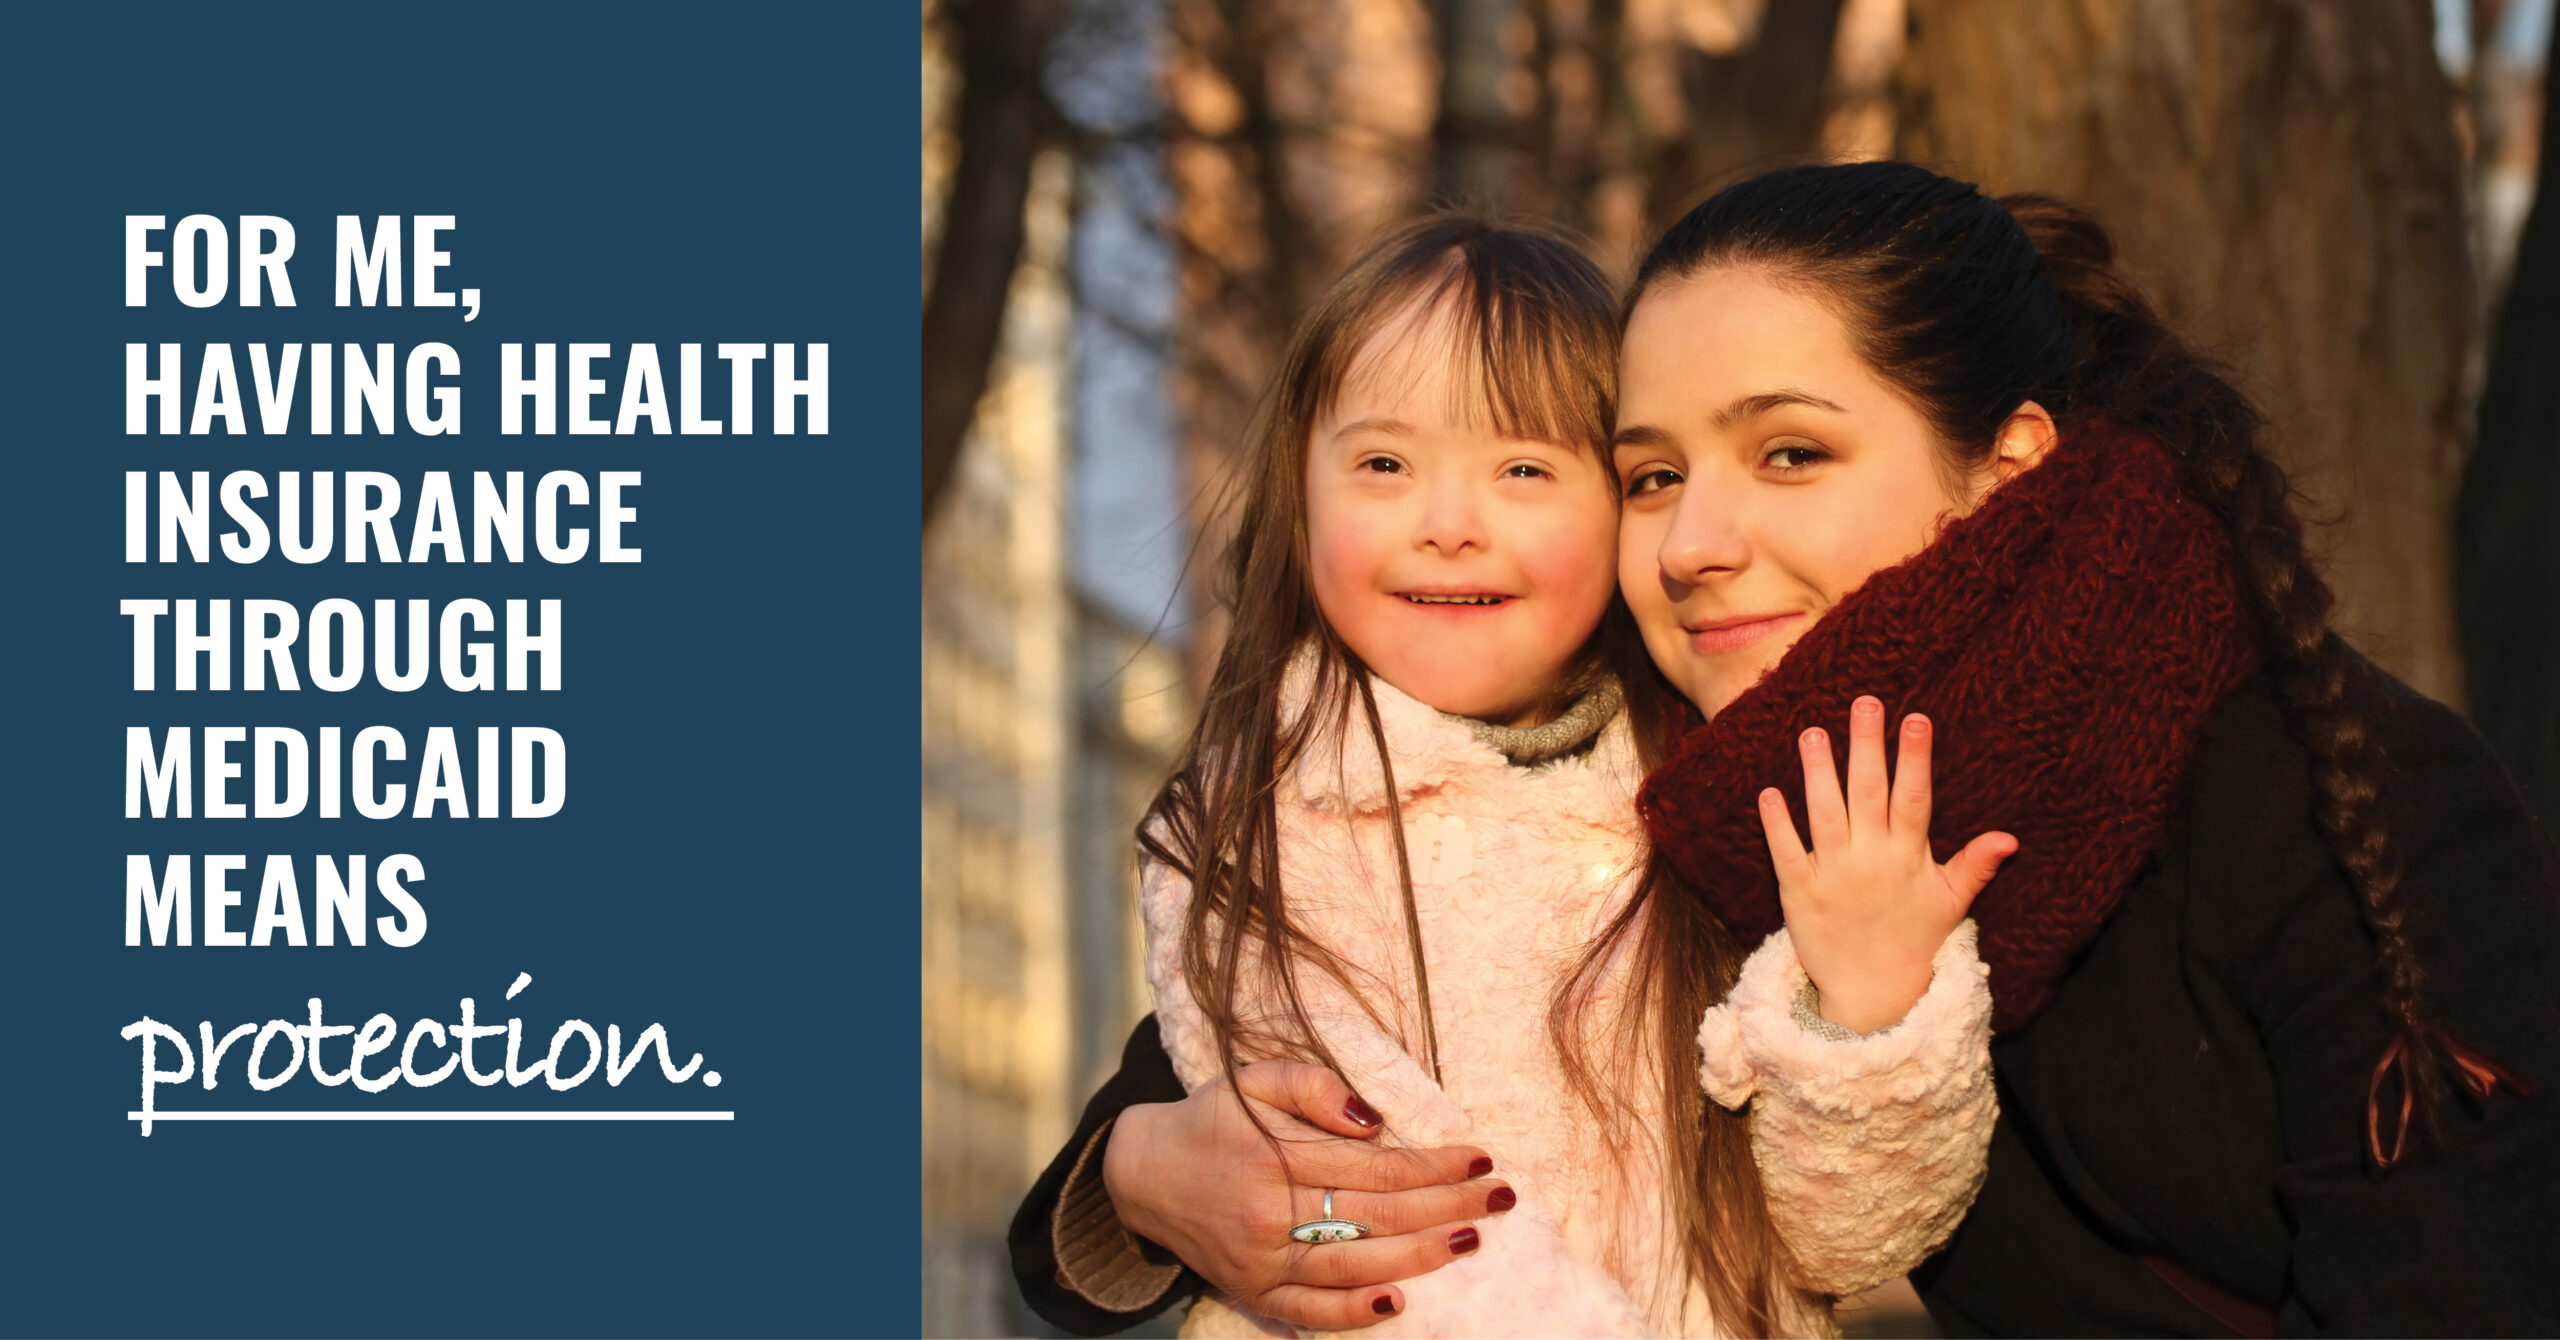 Image of a woman and little girl with Down syndrome and the message “for me, having health insurance through Medicaid means protection.”